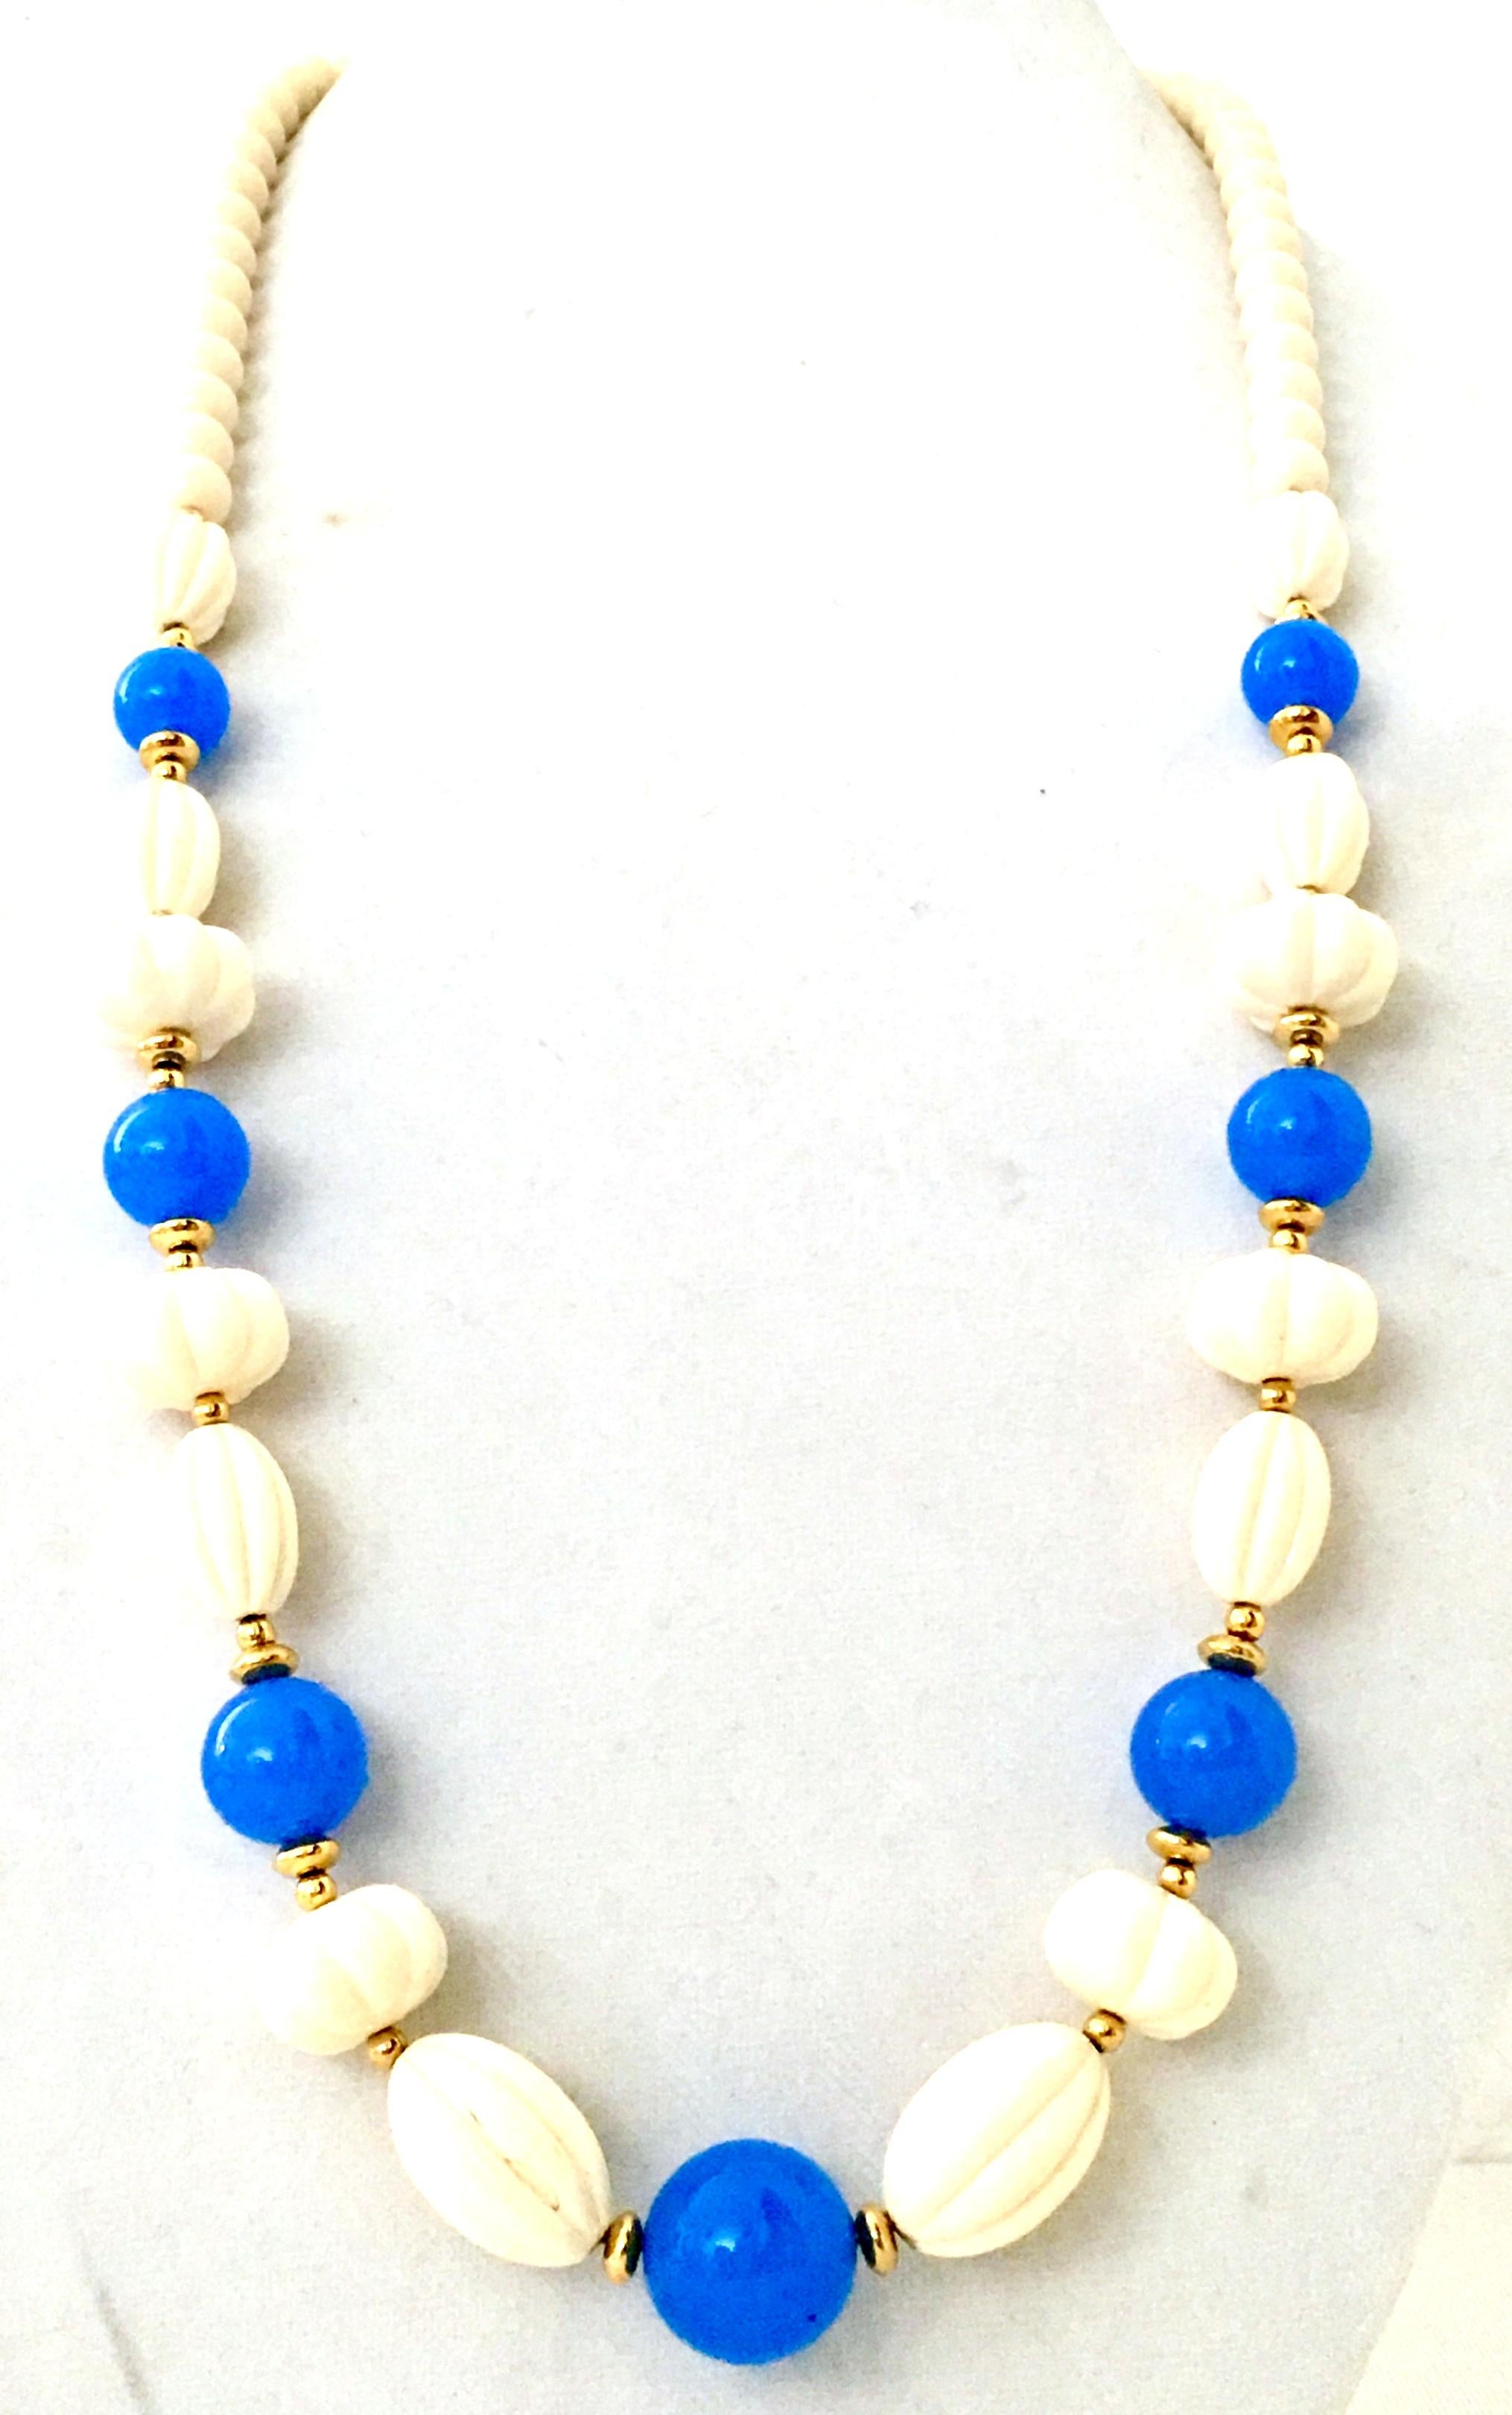 ivory bead necklace